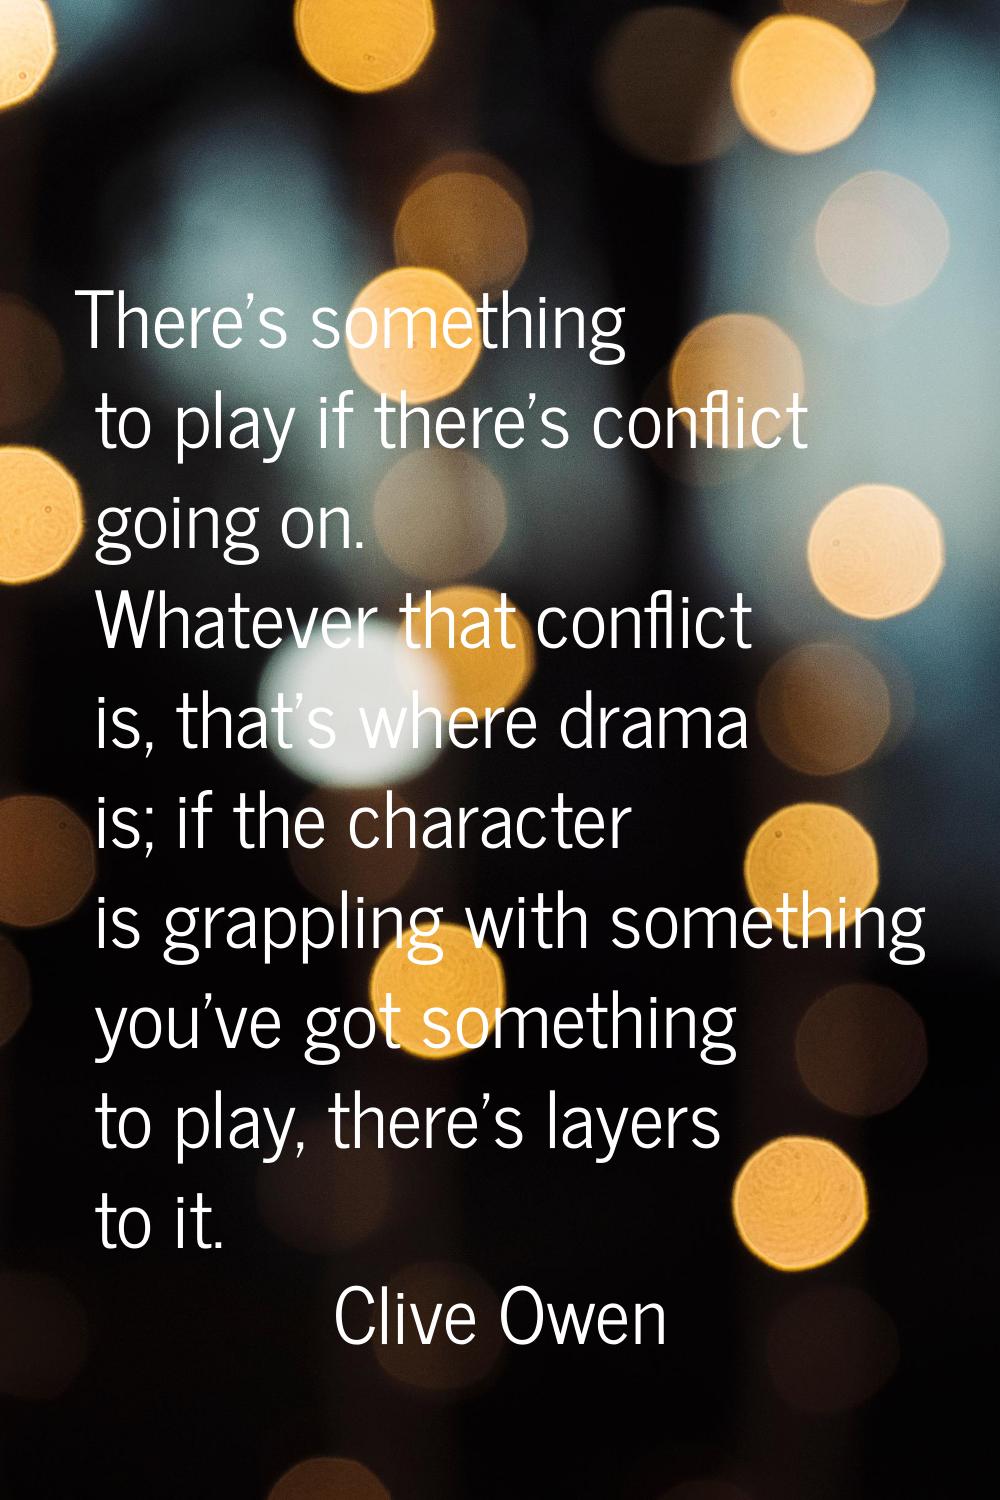 There's something to play if there's conflict going on. Whatever that conflict is, that's where dra